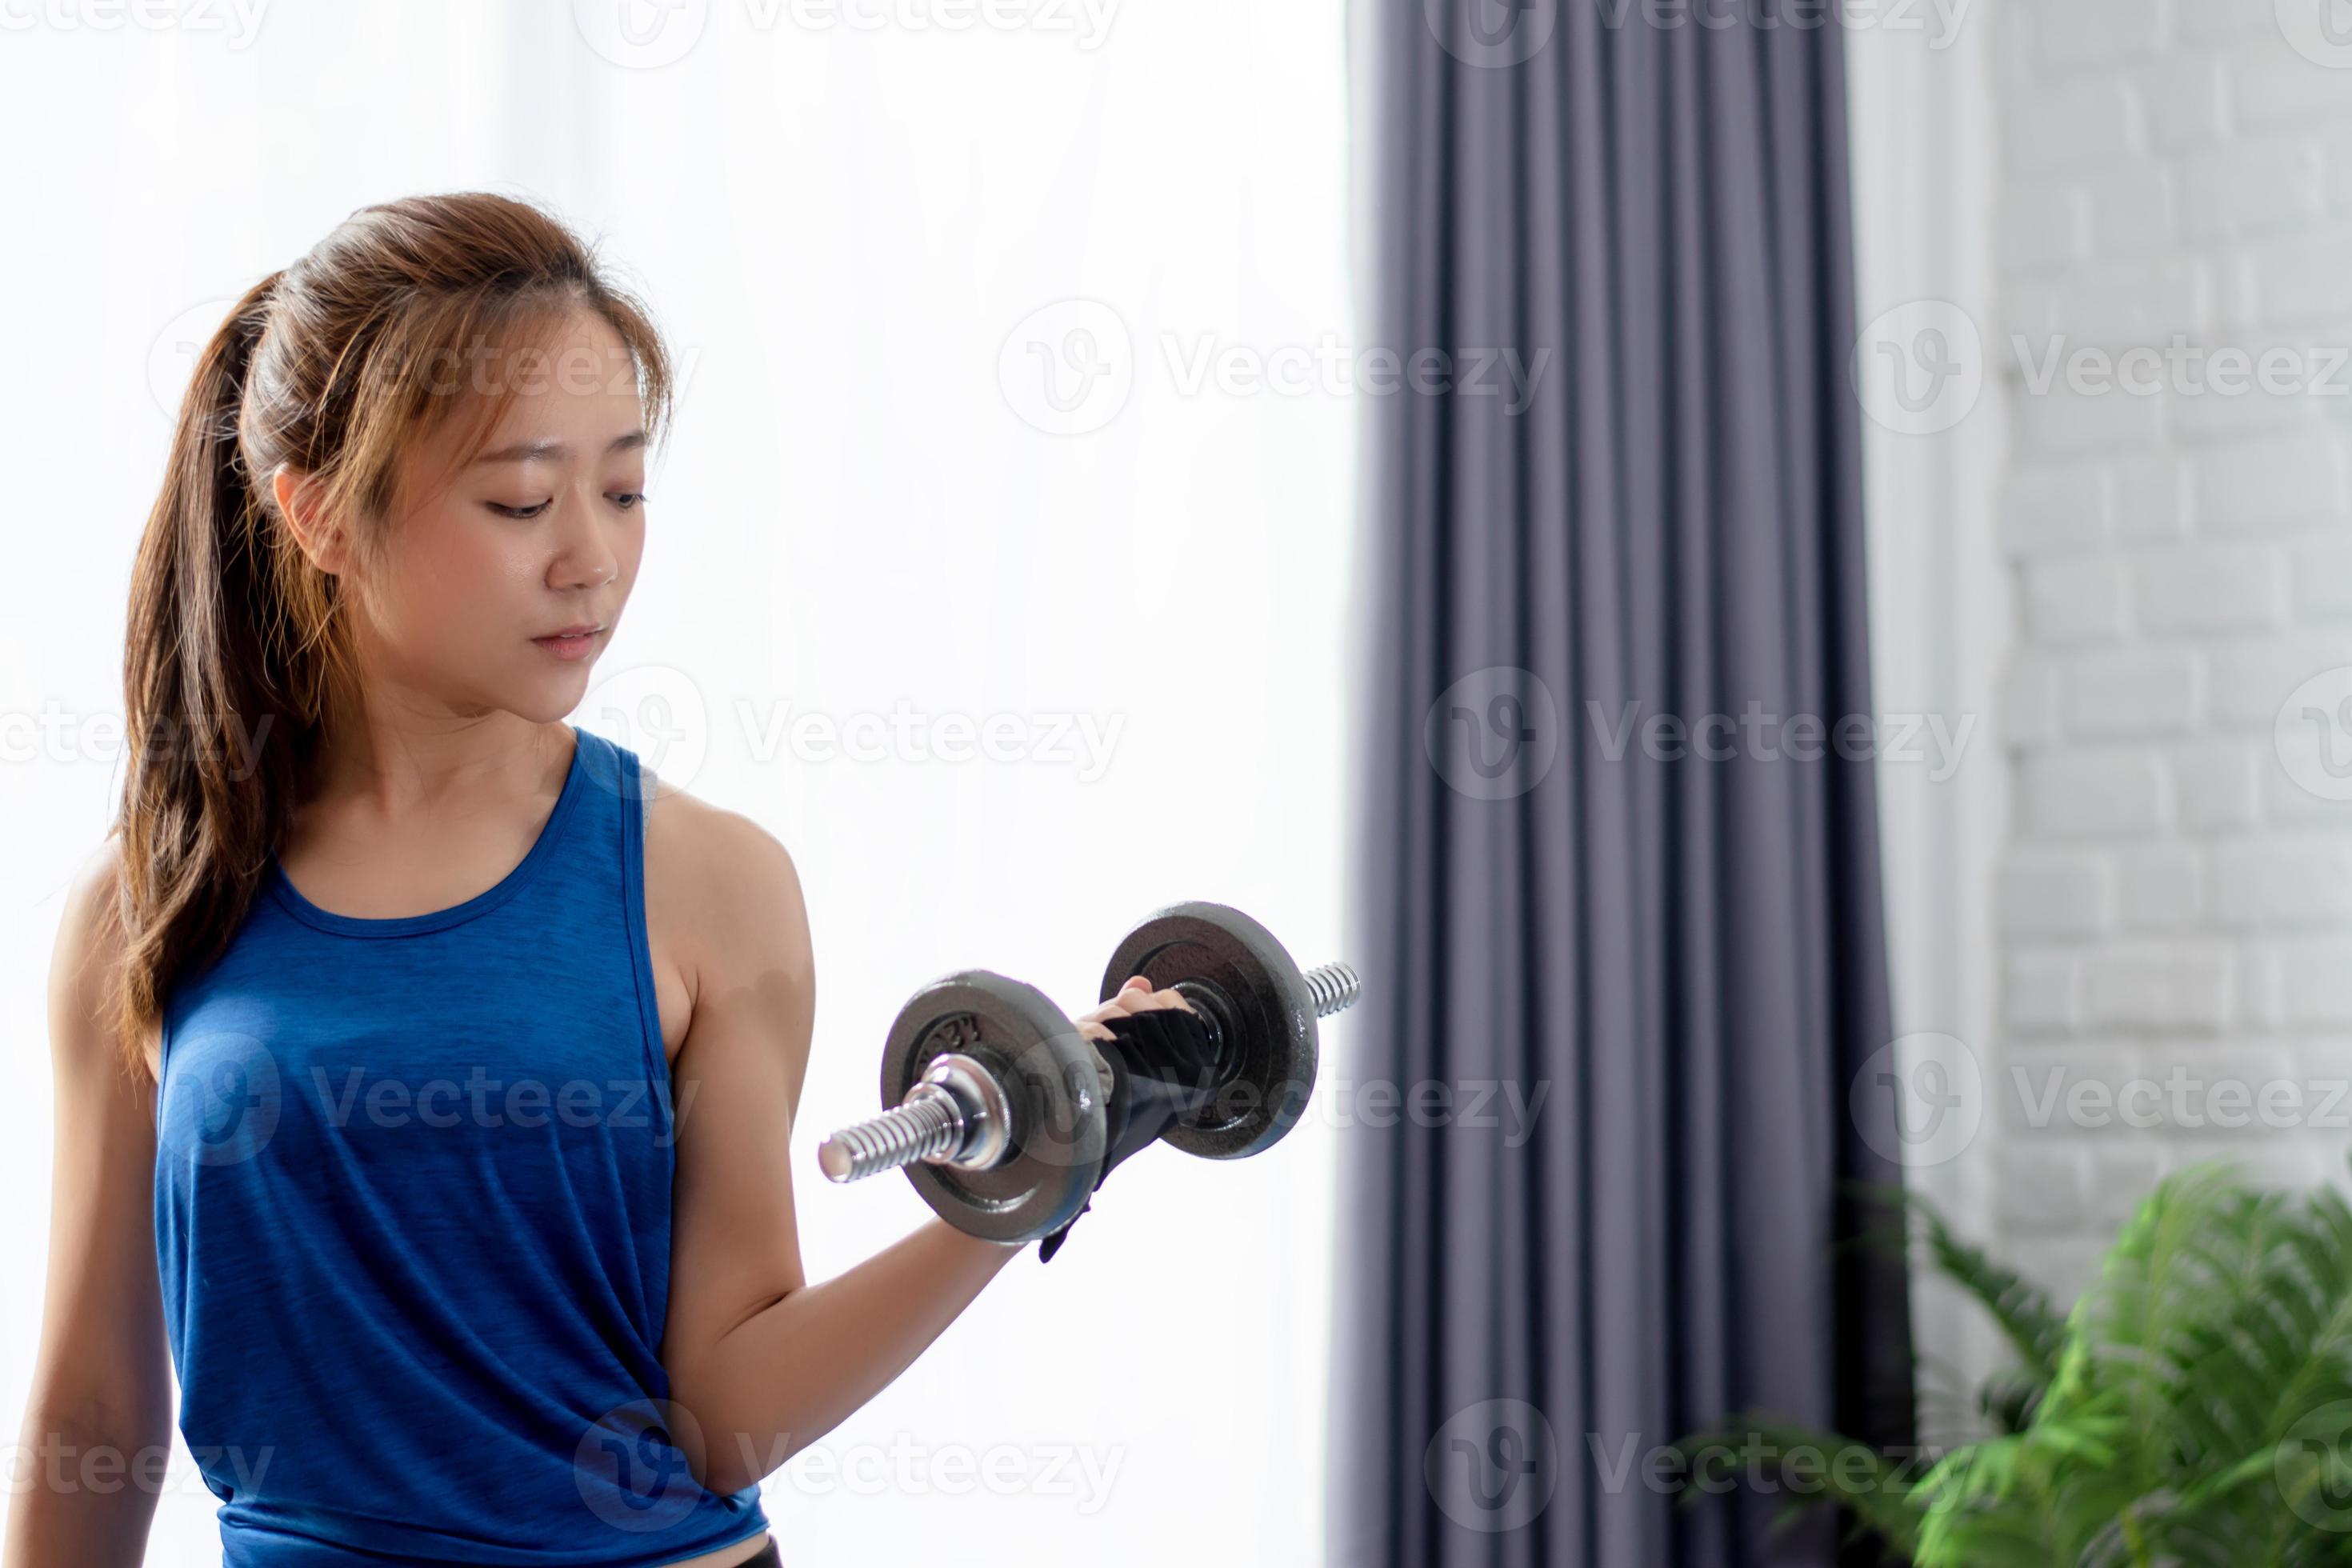 https://static.vecteezy.com/system/resources/previews/015/934/699/large_2x/asian-women-exercise-to-strengthen-arm-muscles-at-home-she-is-lifting-weights-photo.jpg